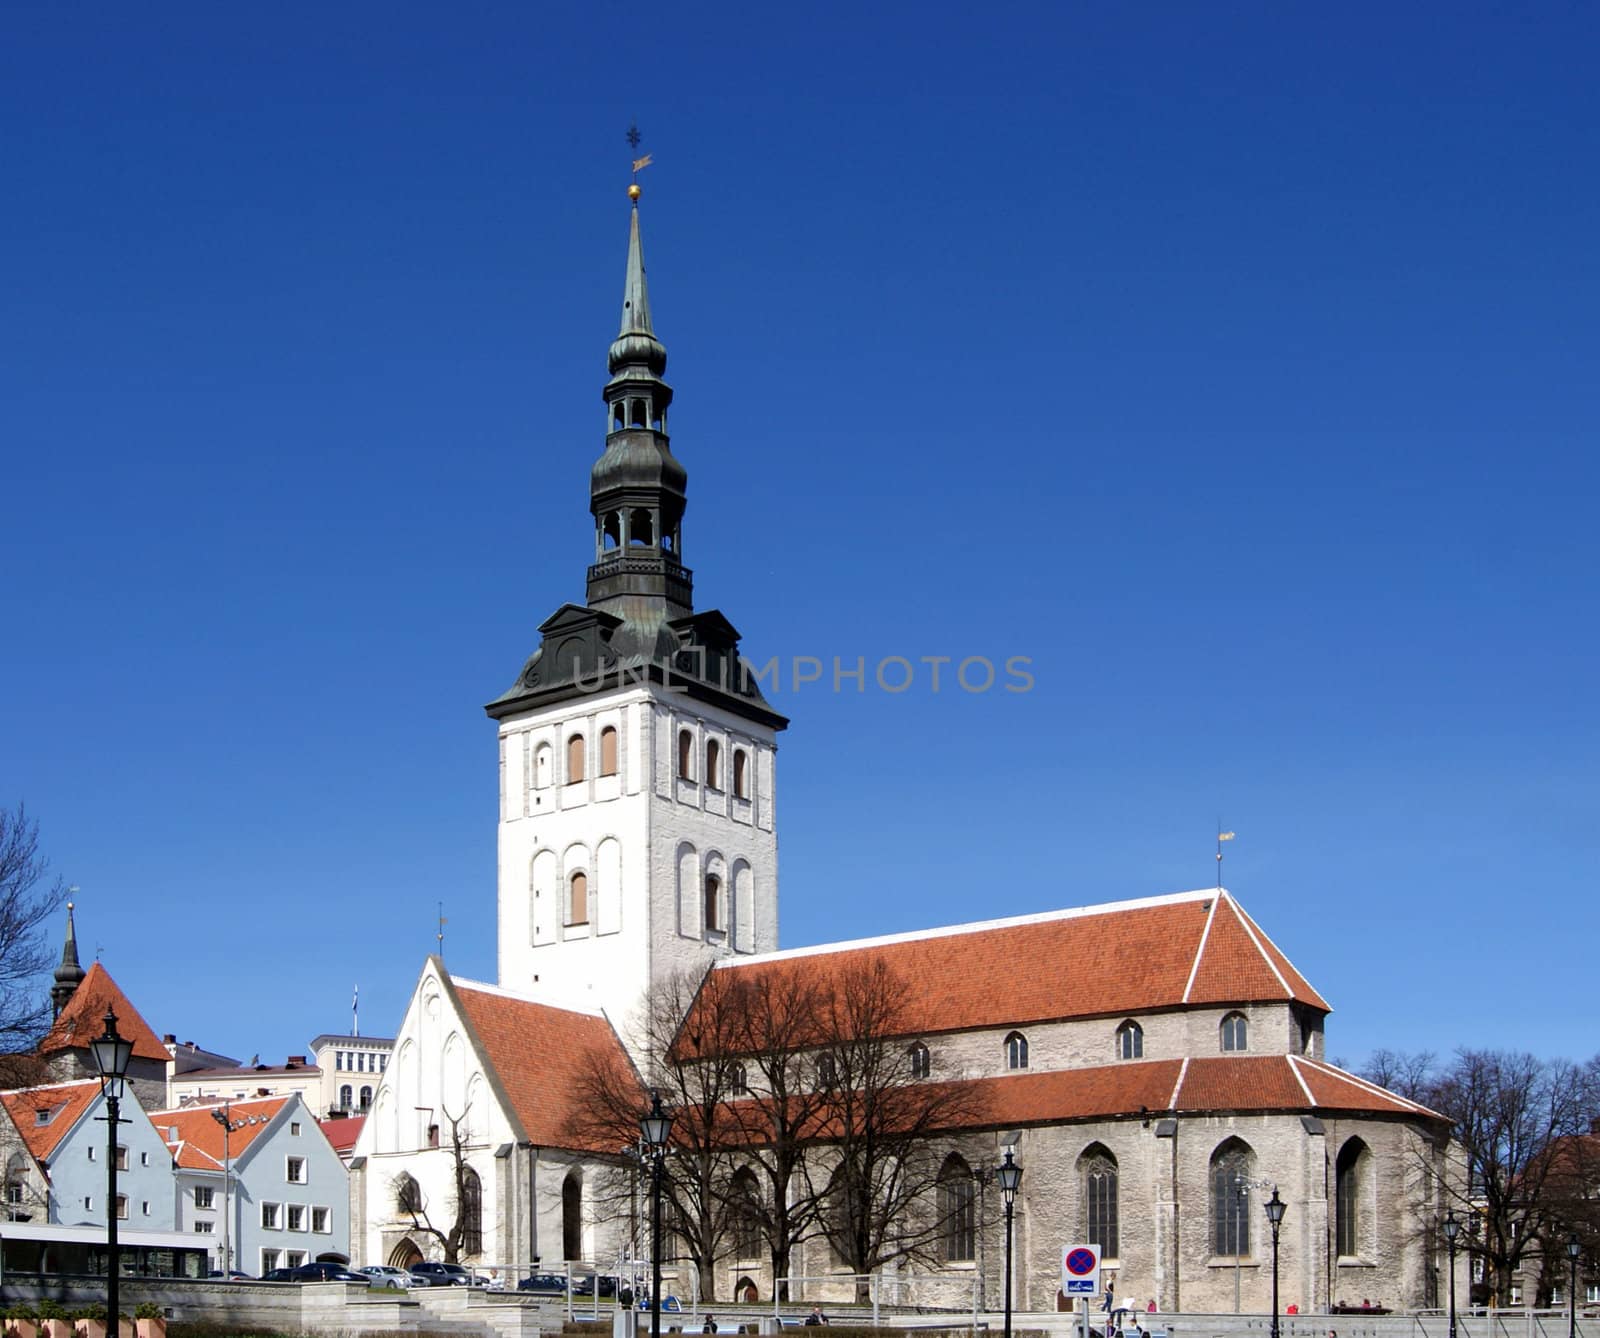 The old church is located in the historical center Tallinn